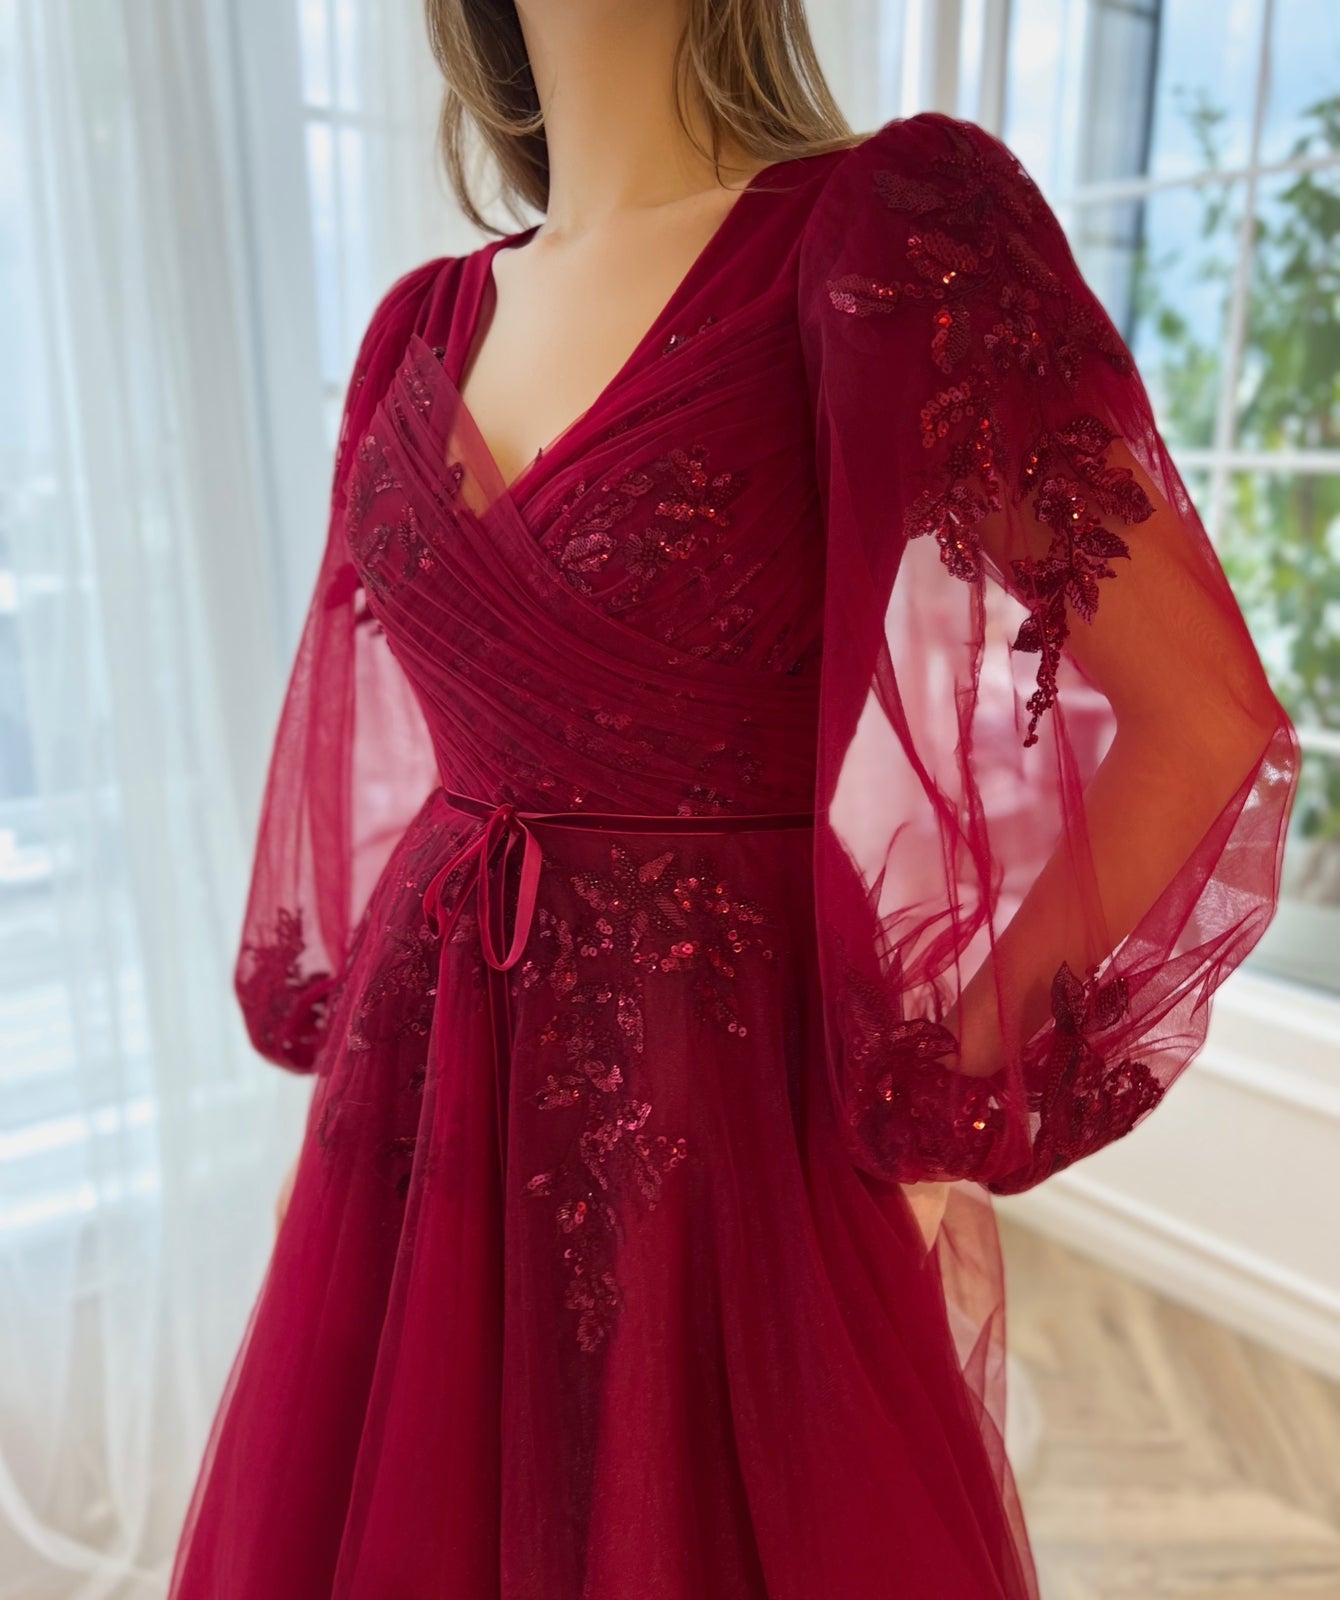 Red A-Line dress with embroidery and long sleeves